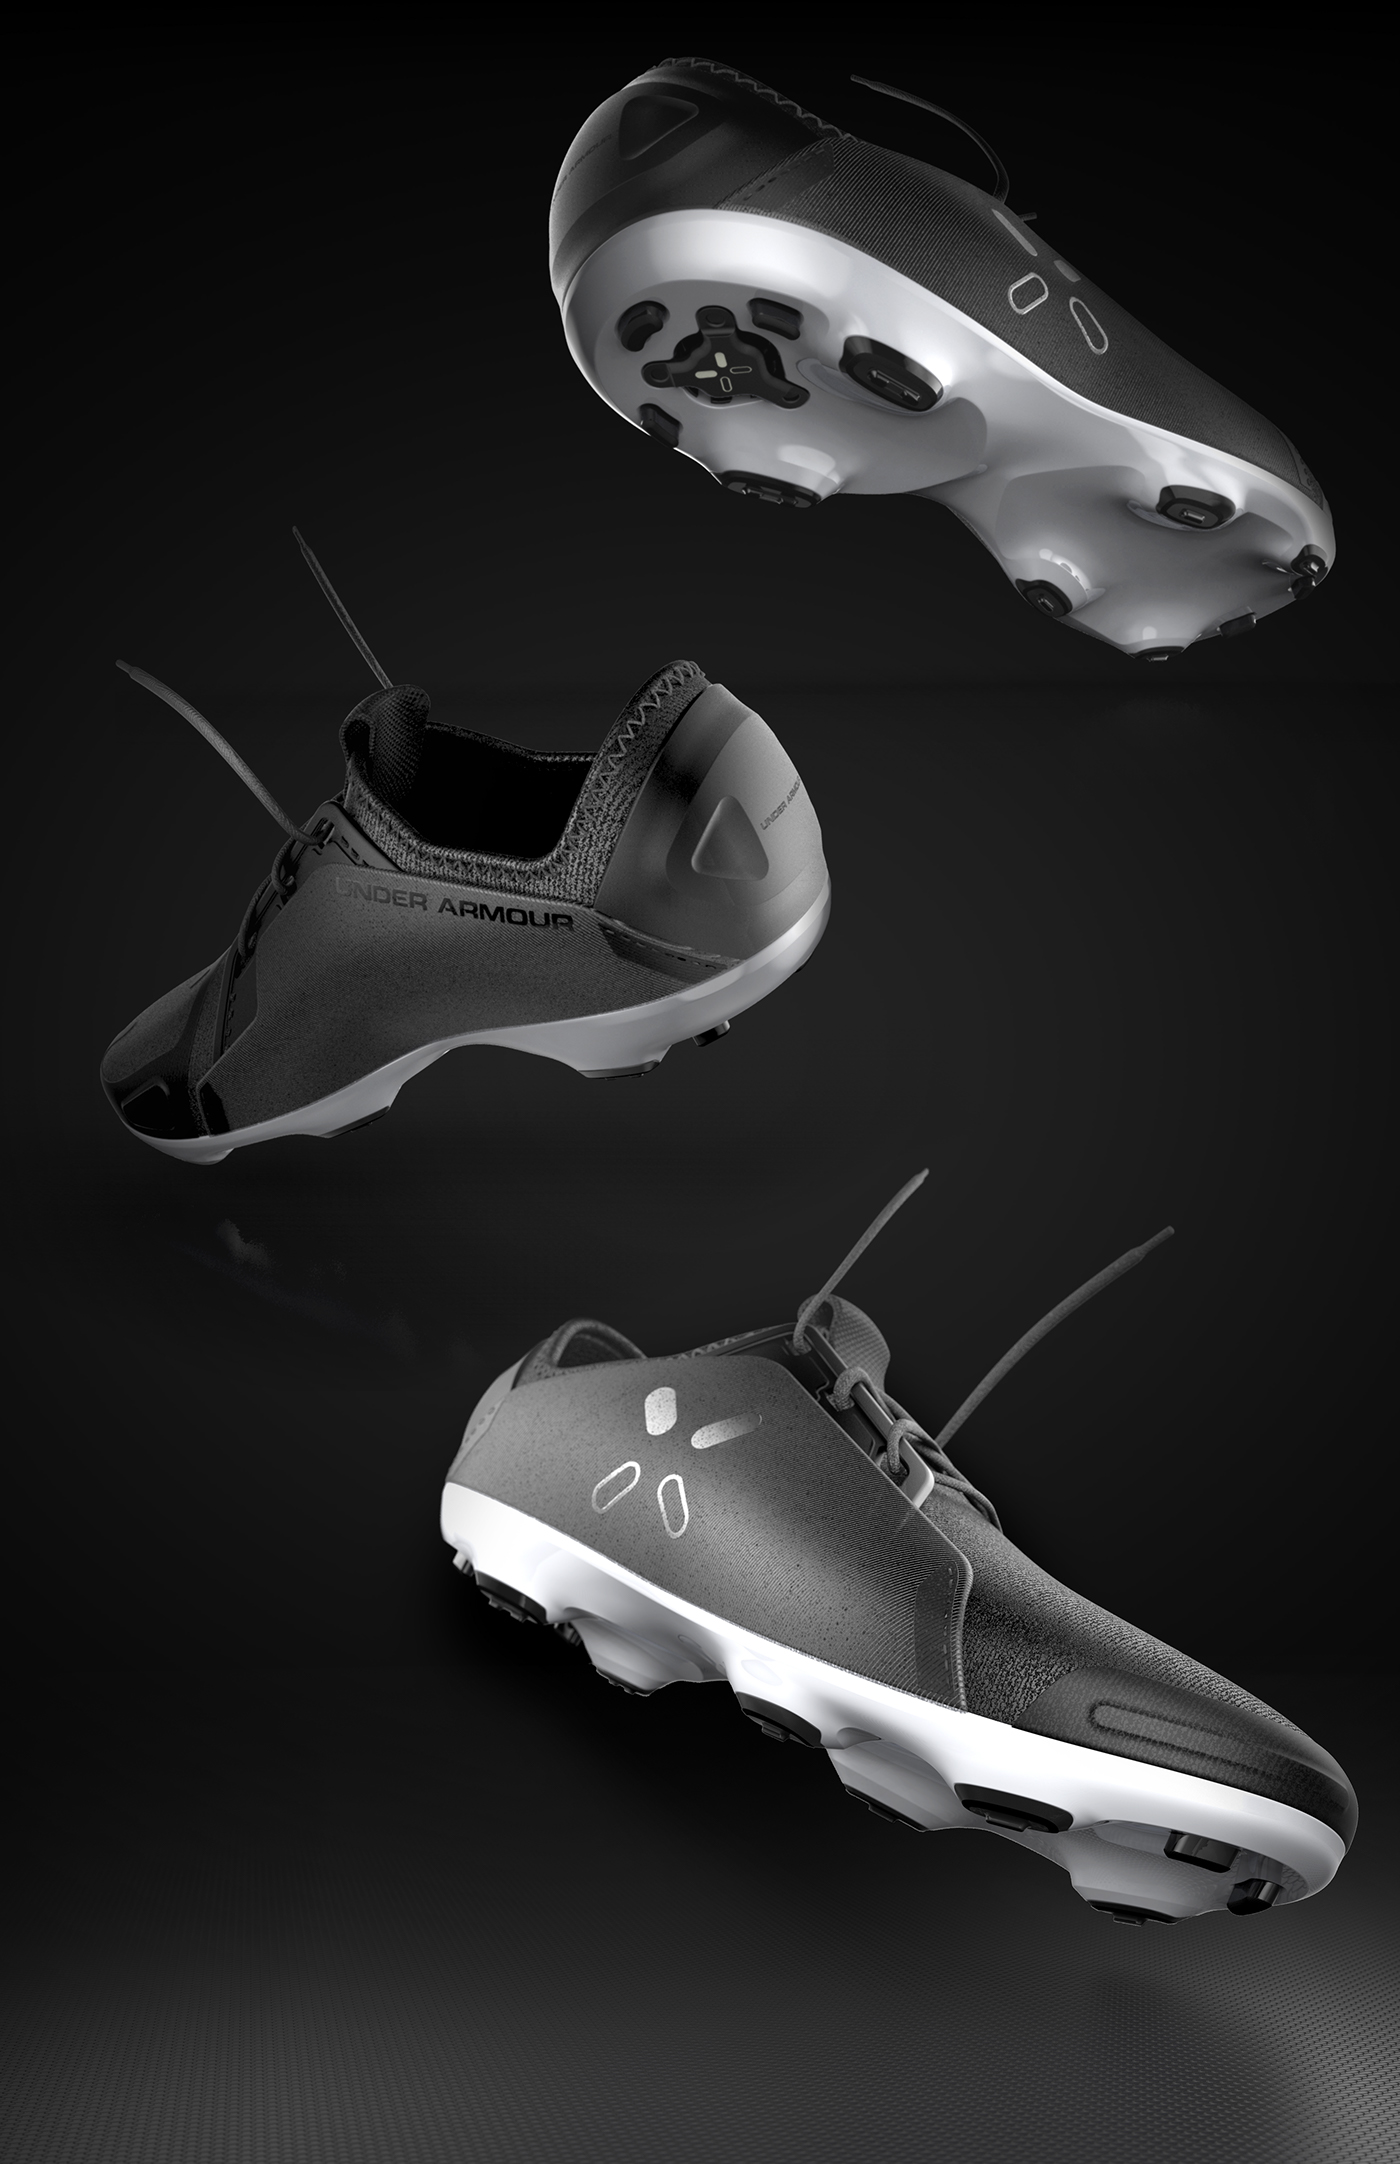 IoT connected shoe cleat design